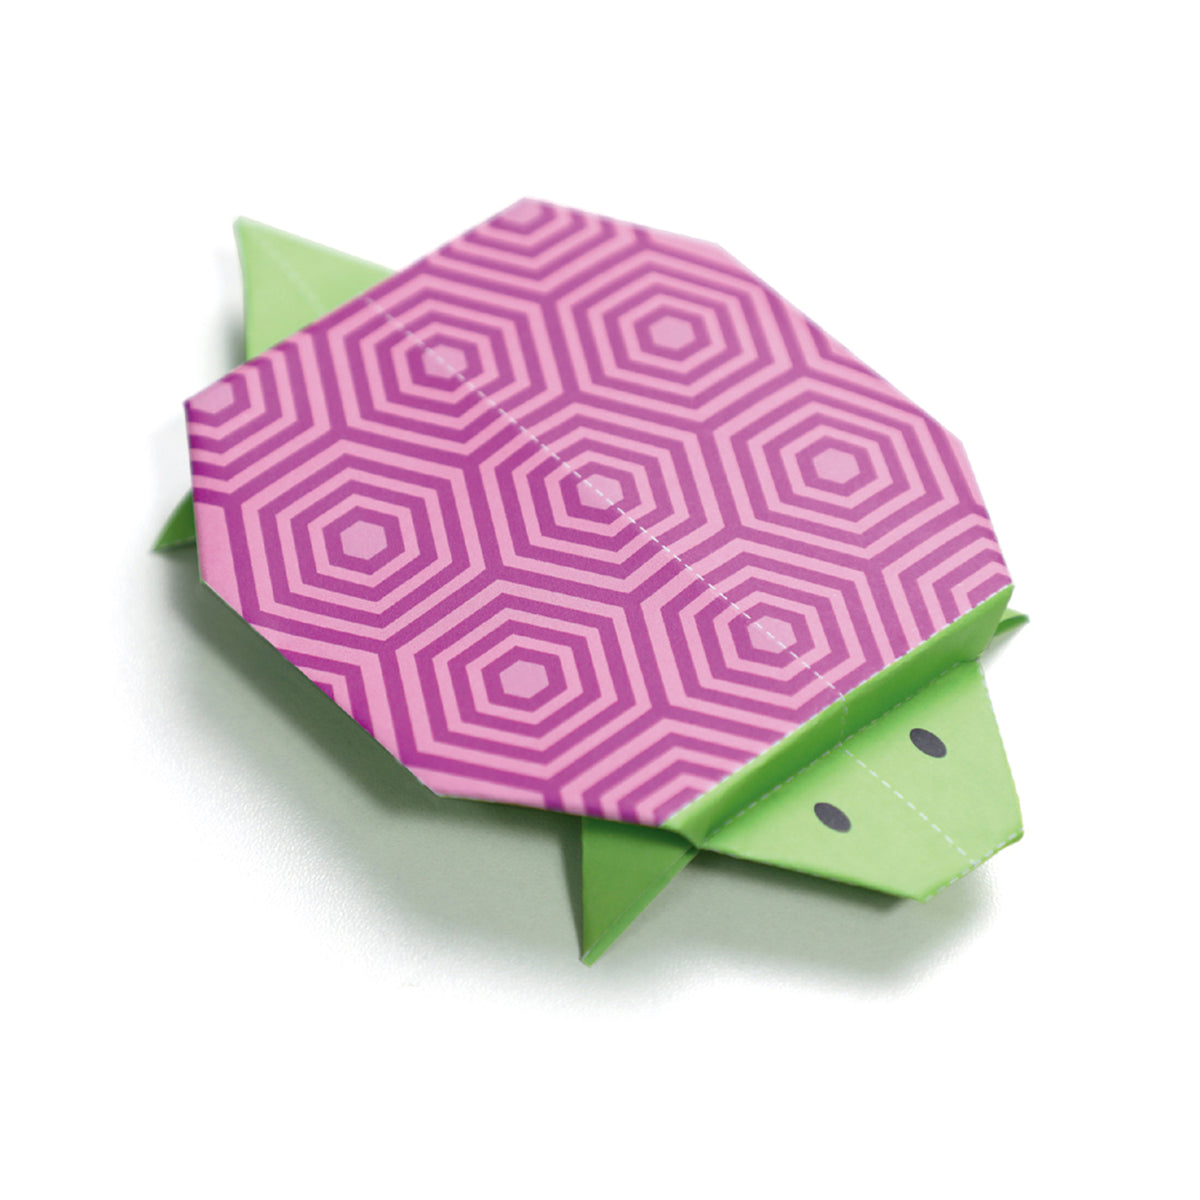 Petit Gifts - Origami Animals - The Toy Box Hanover